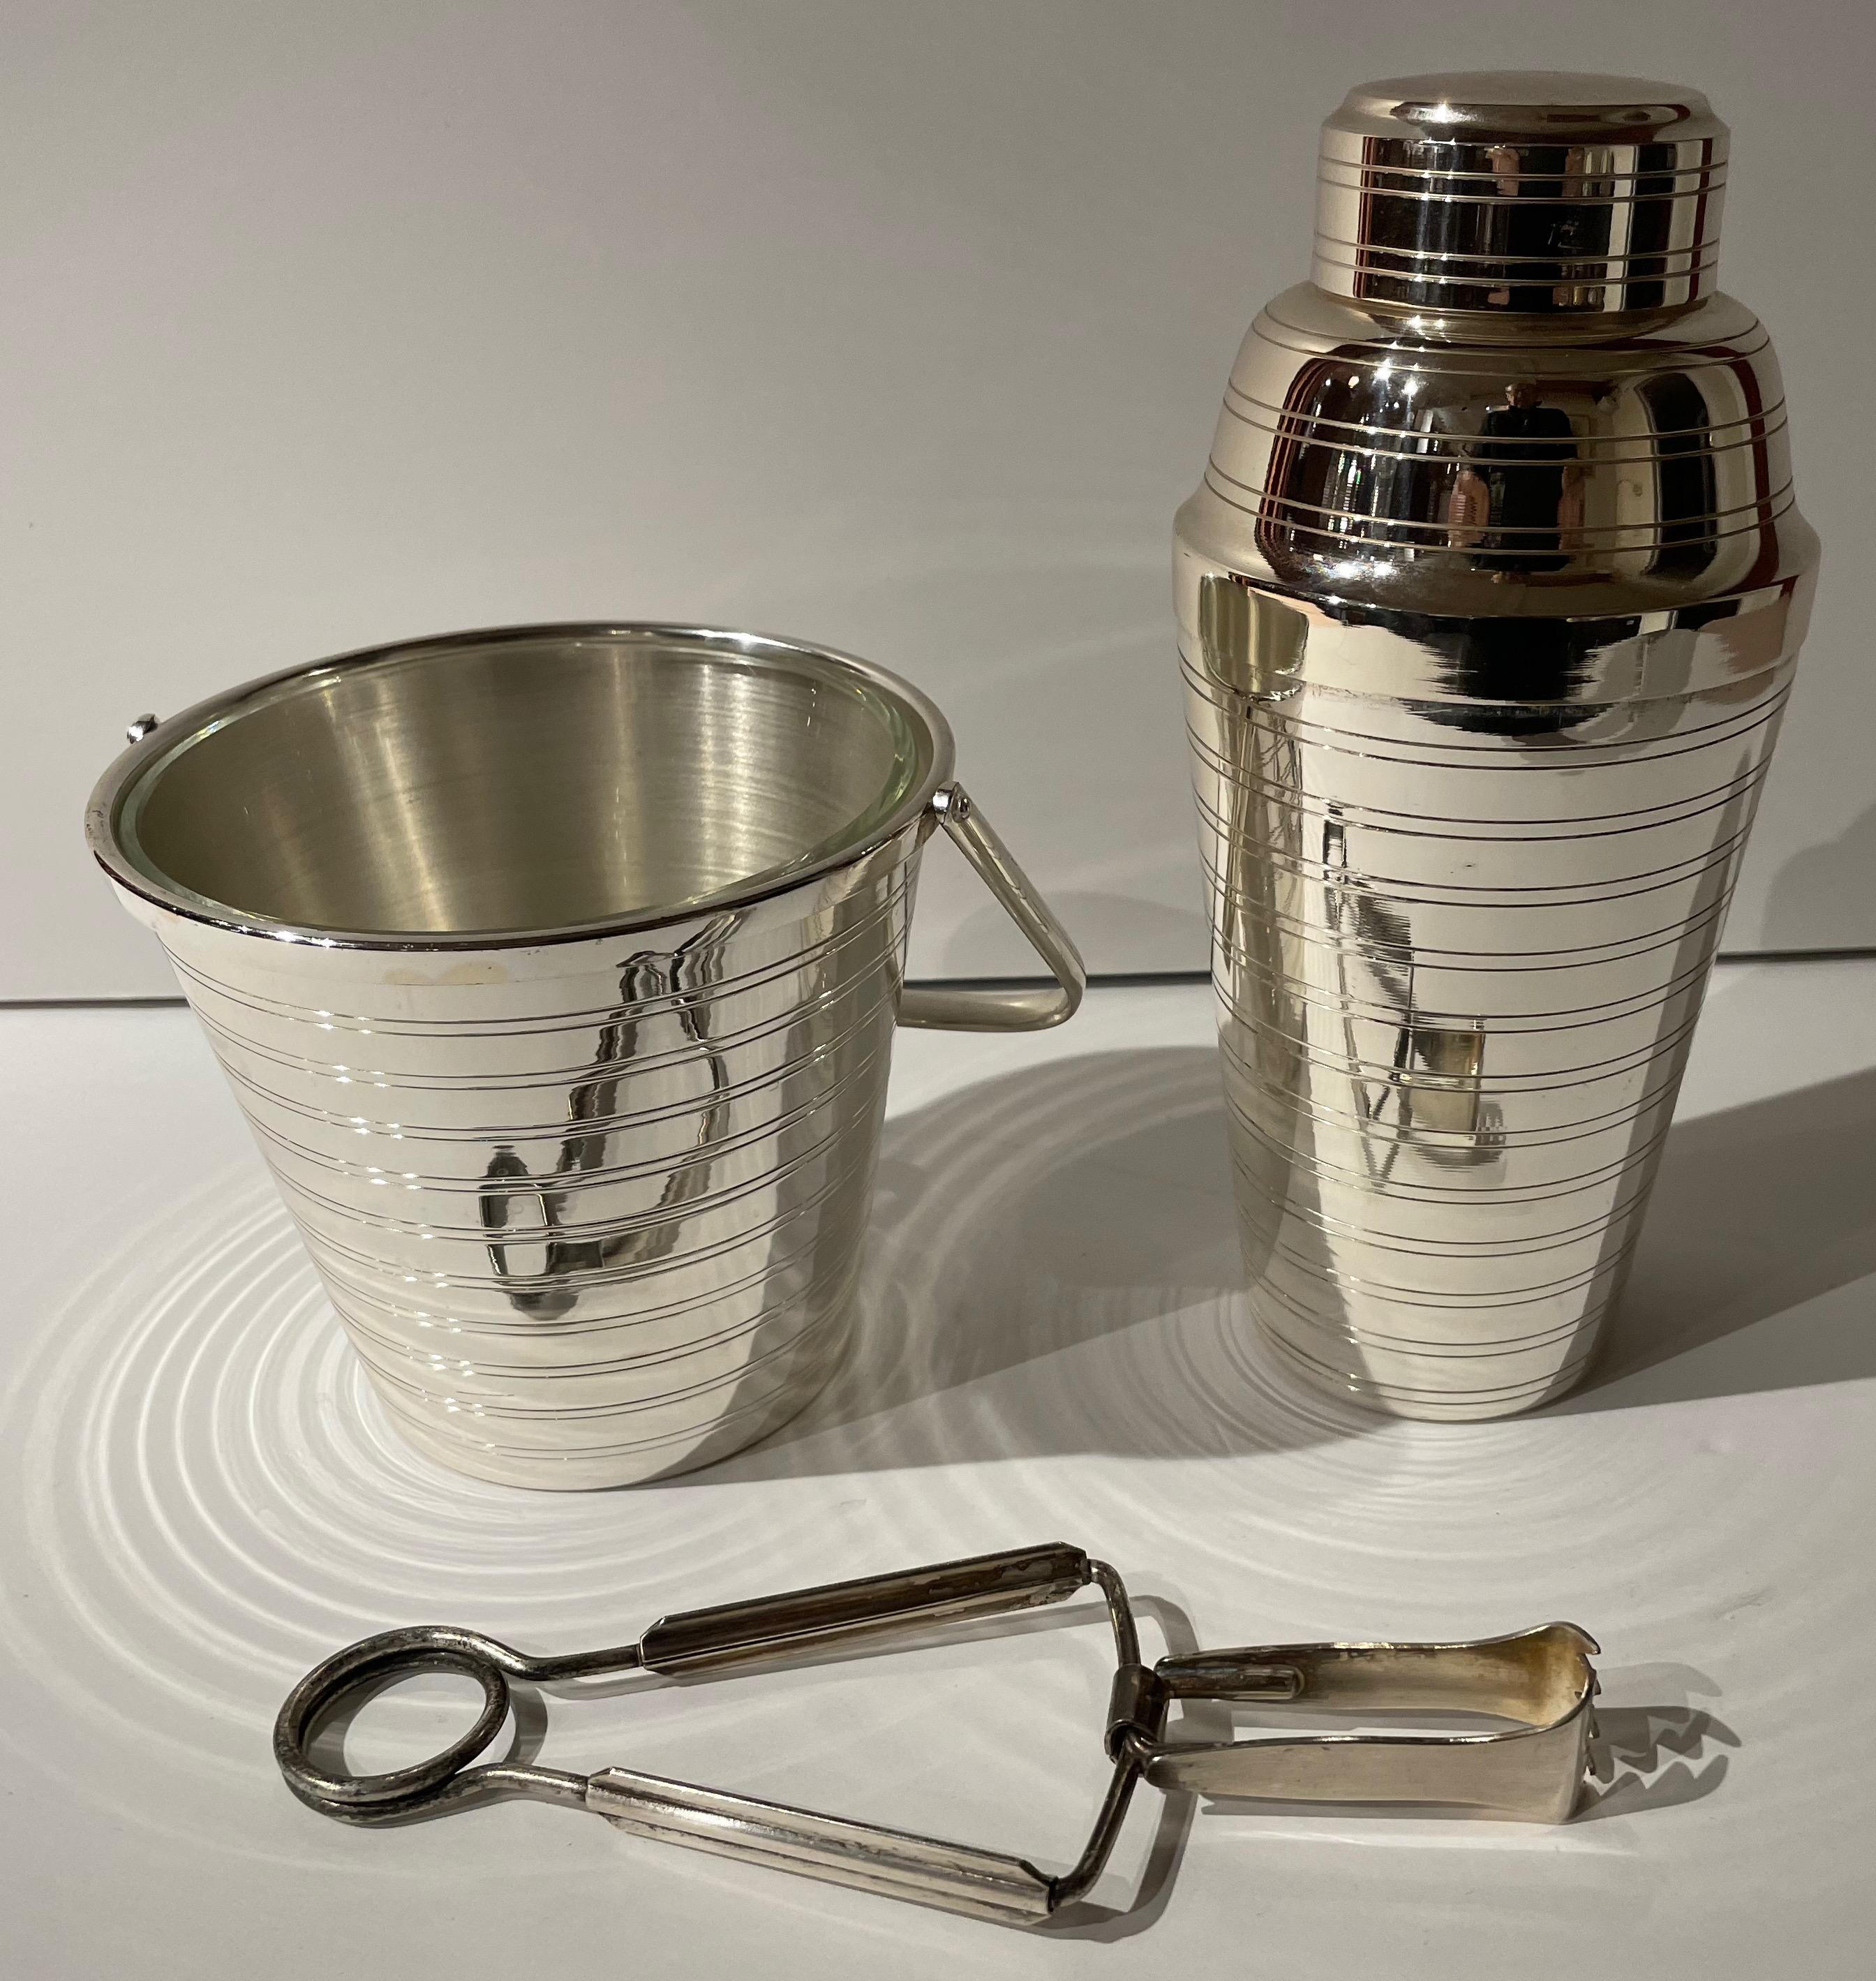 French Art Deco Cocktail Shaker Matching Ice Bucket and Tongs. Excellent original condition, beautifully matched set with original glass insert for ice, and a great pair of ice tongs to complete the service. We do not see these matched sets very